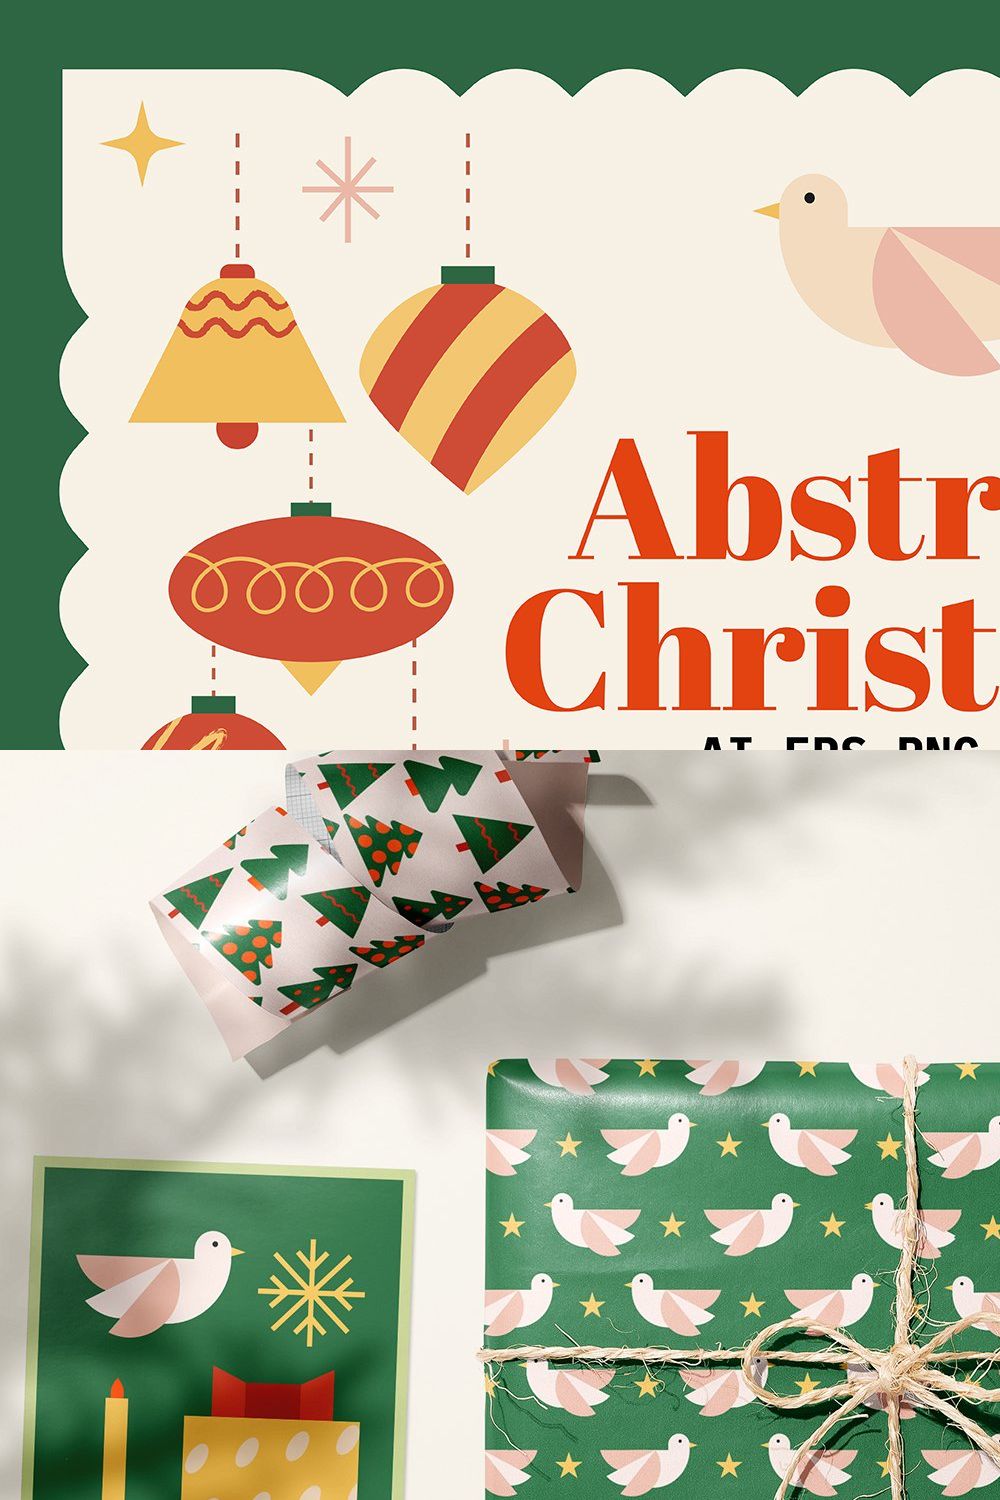 Abstract Christmas cliparts, posters pinterest preview image.